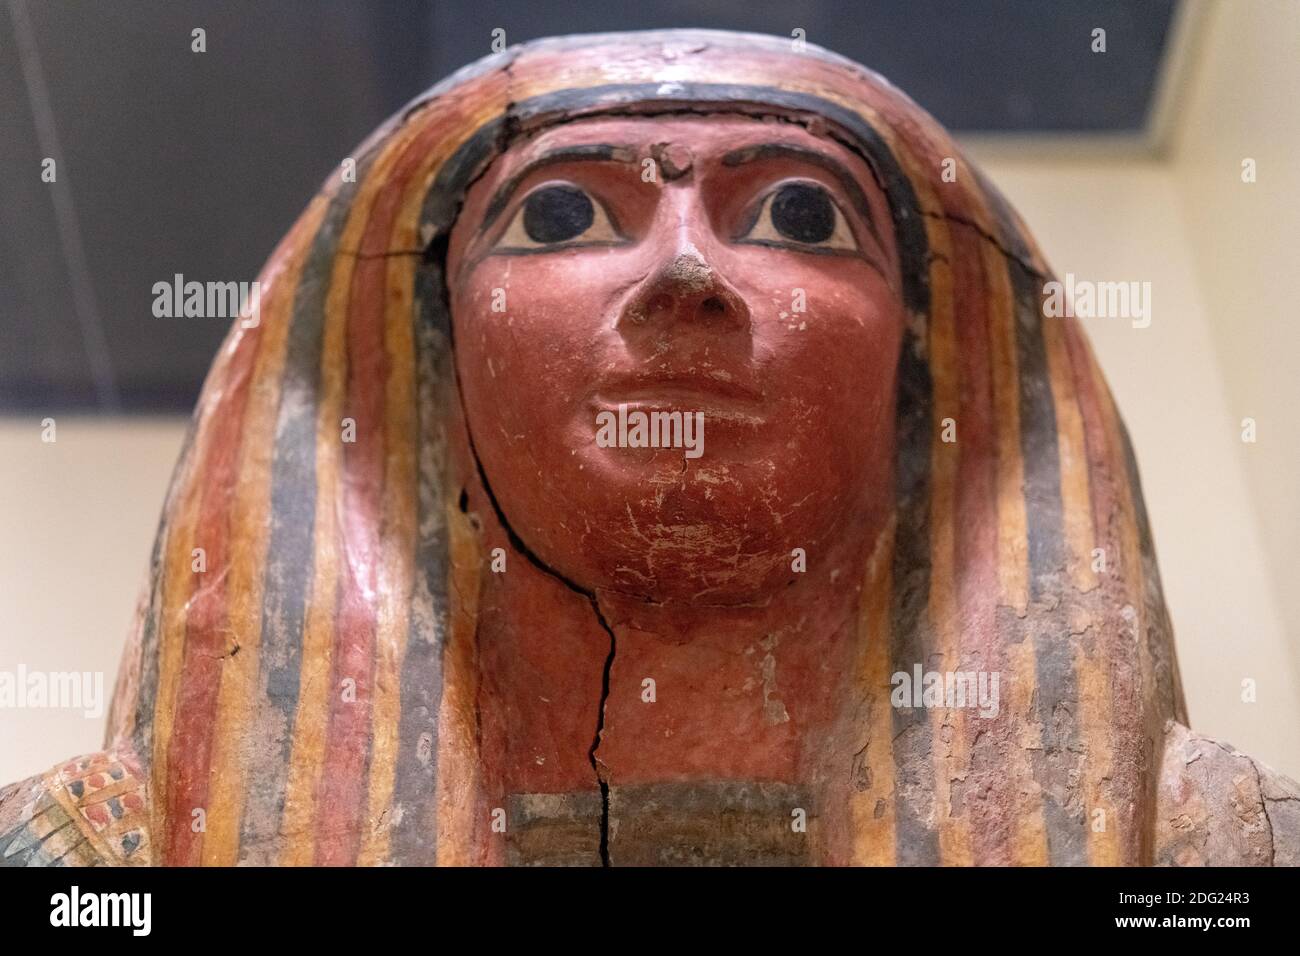 Mummy-case of Pedikhonsu from Thebes. The item is seen in the Royal Ontario Museum exhibit named 'Egyptian Mummies: Ancient Lives. New Discoveries' Stock Photo